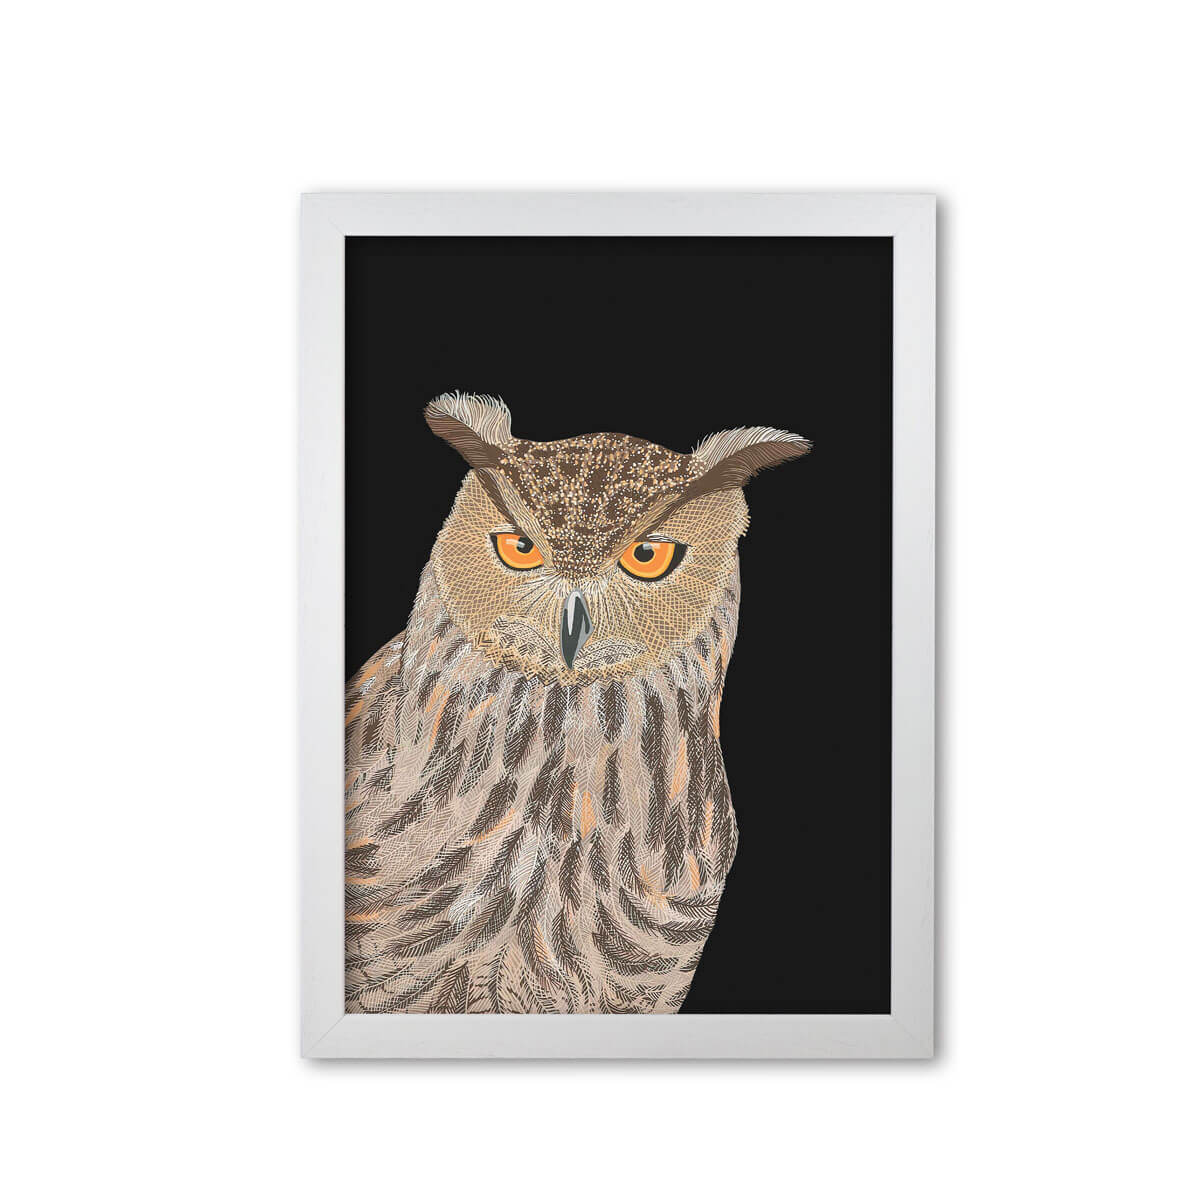 Eagle Owl Print Mounted And Framed By Bird The Artist